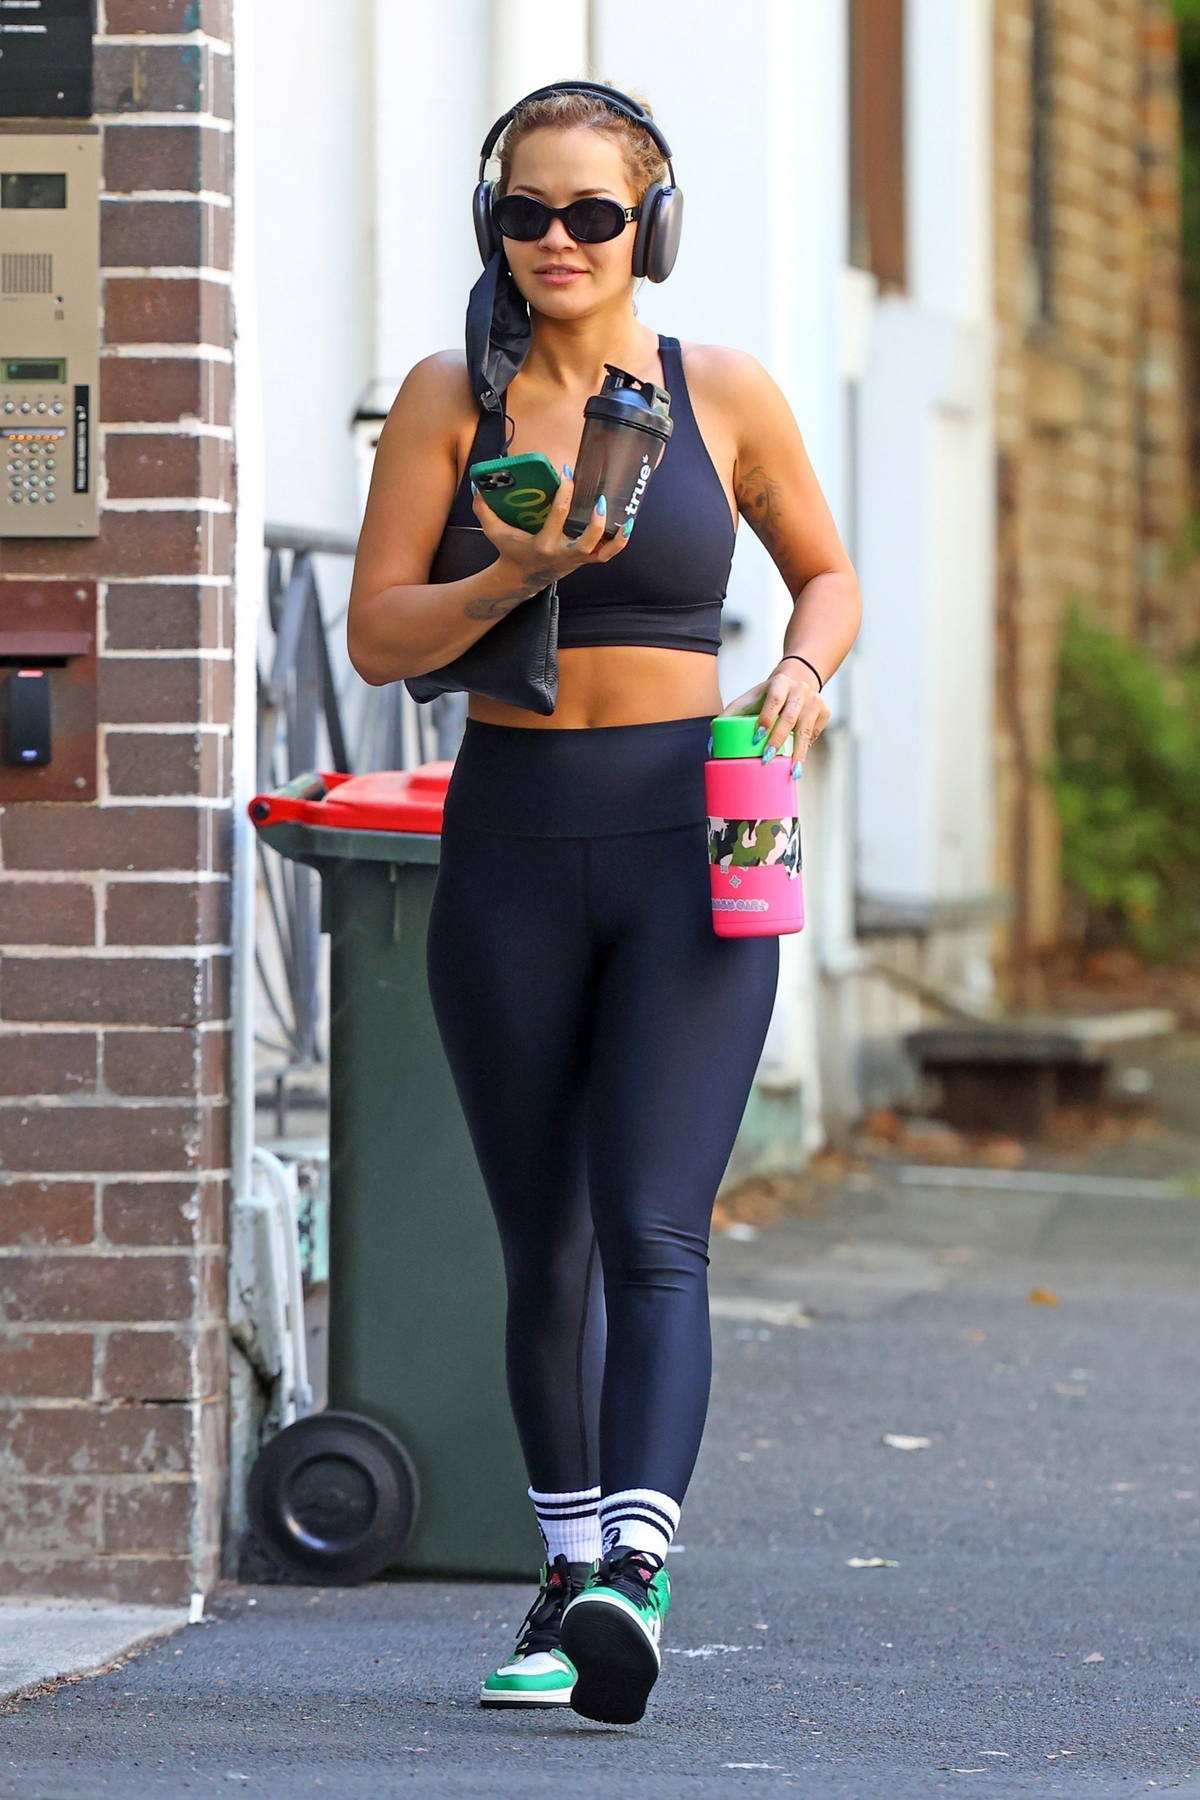 Rita Ora rocks a navy blue sports bra and leggings with Nike Dunks for a gym